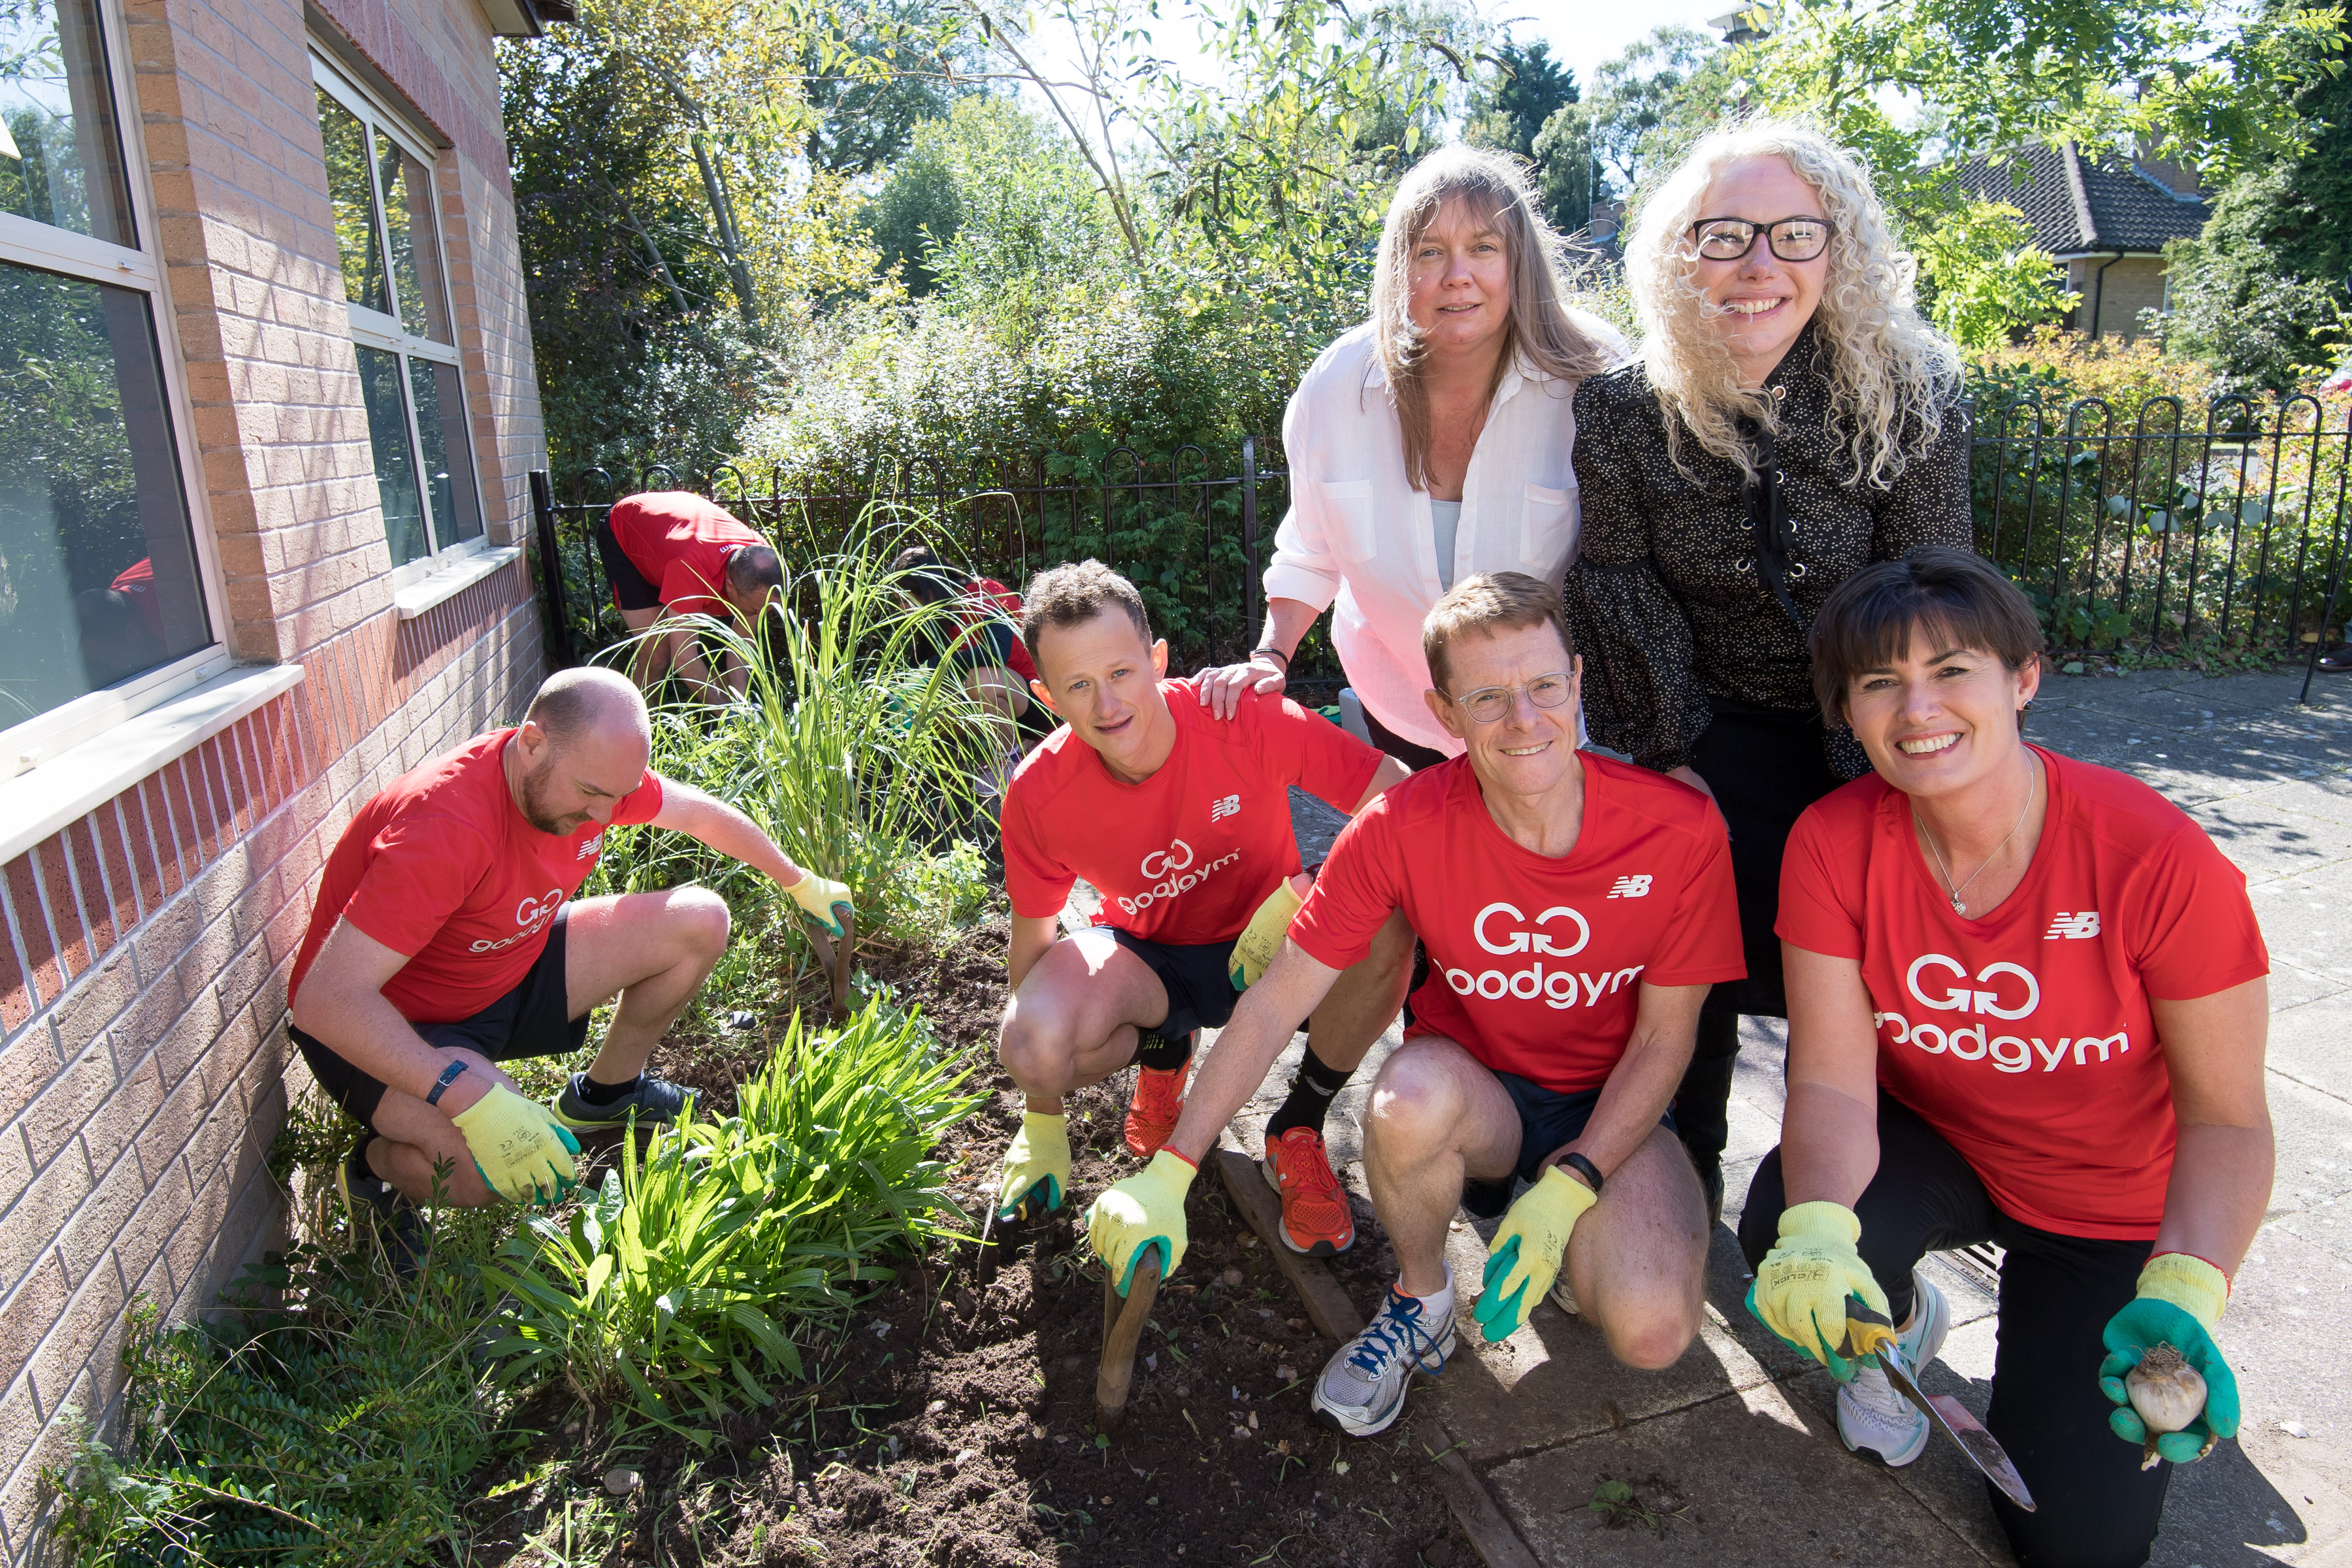 Mayor Andy Street (third from left, bottom row), gets stuck into a community gardening project with runners from GoodGym Solihull.